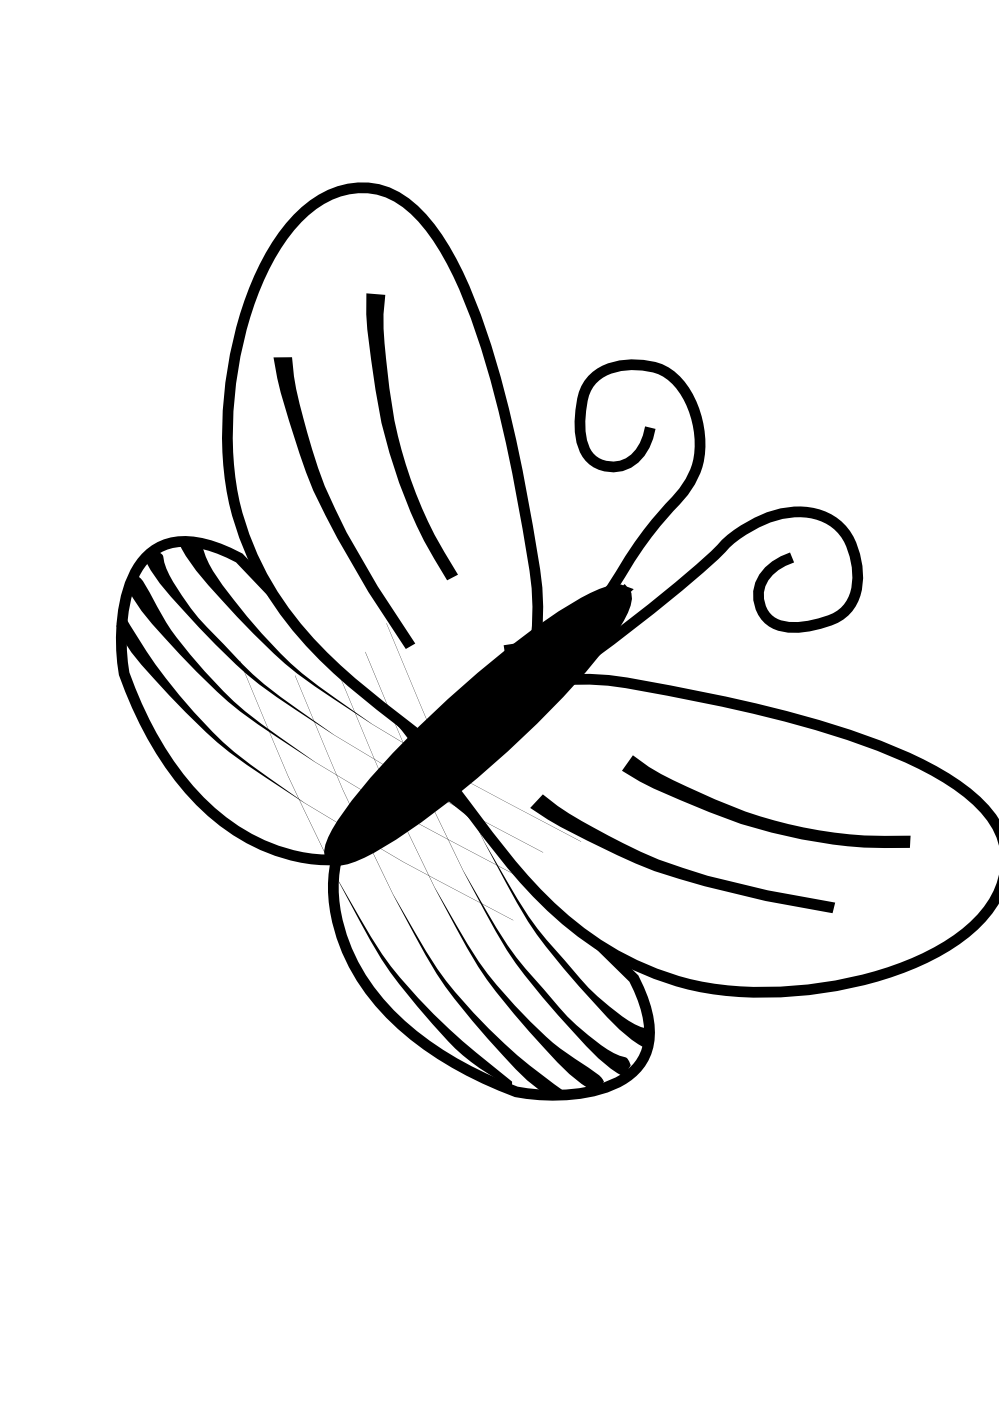 Flower Clip Art Black And White Widescreen 2 HD Wallpapers | amagico.